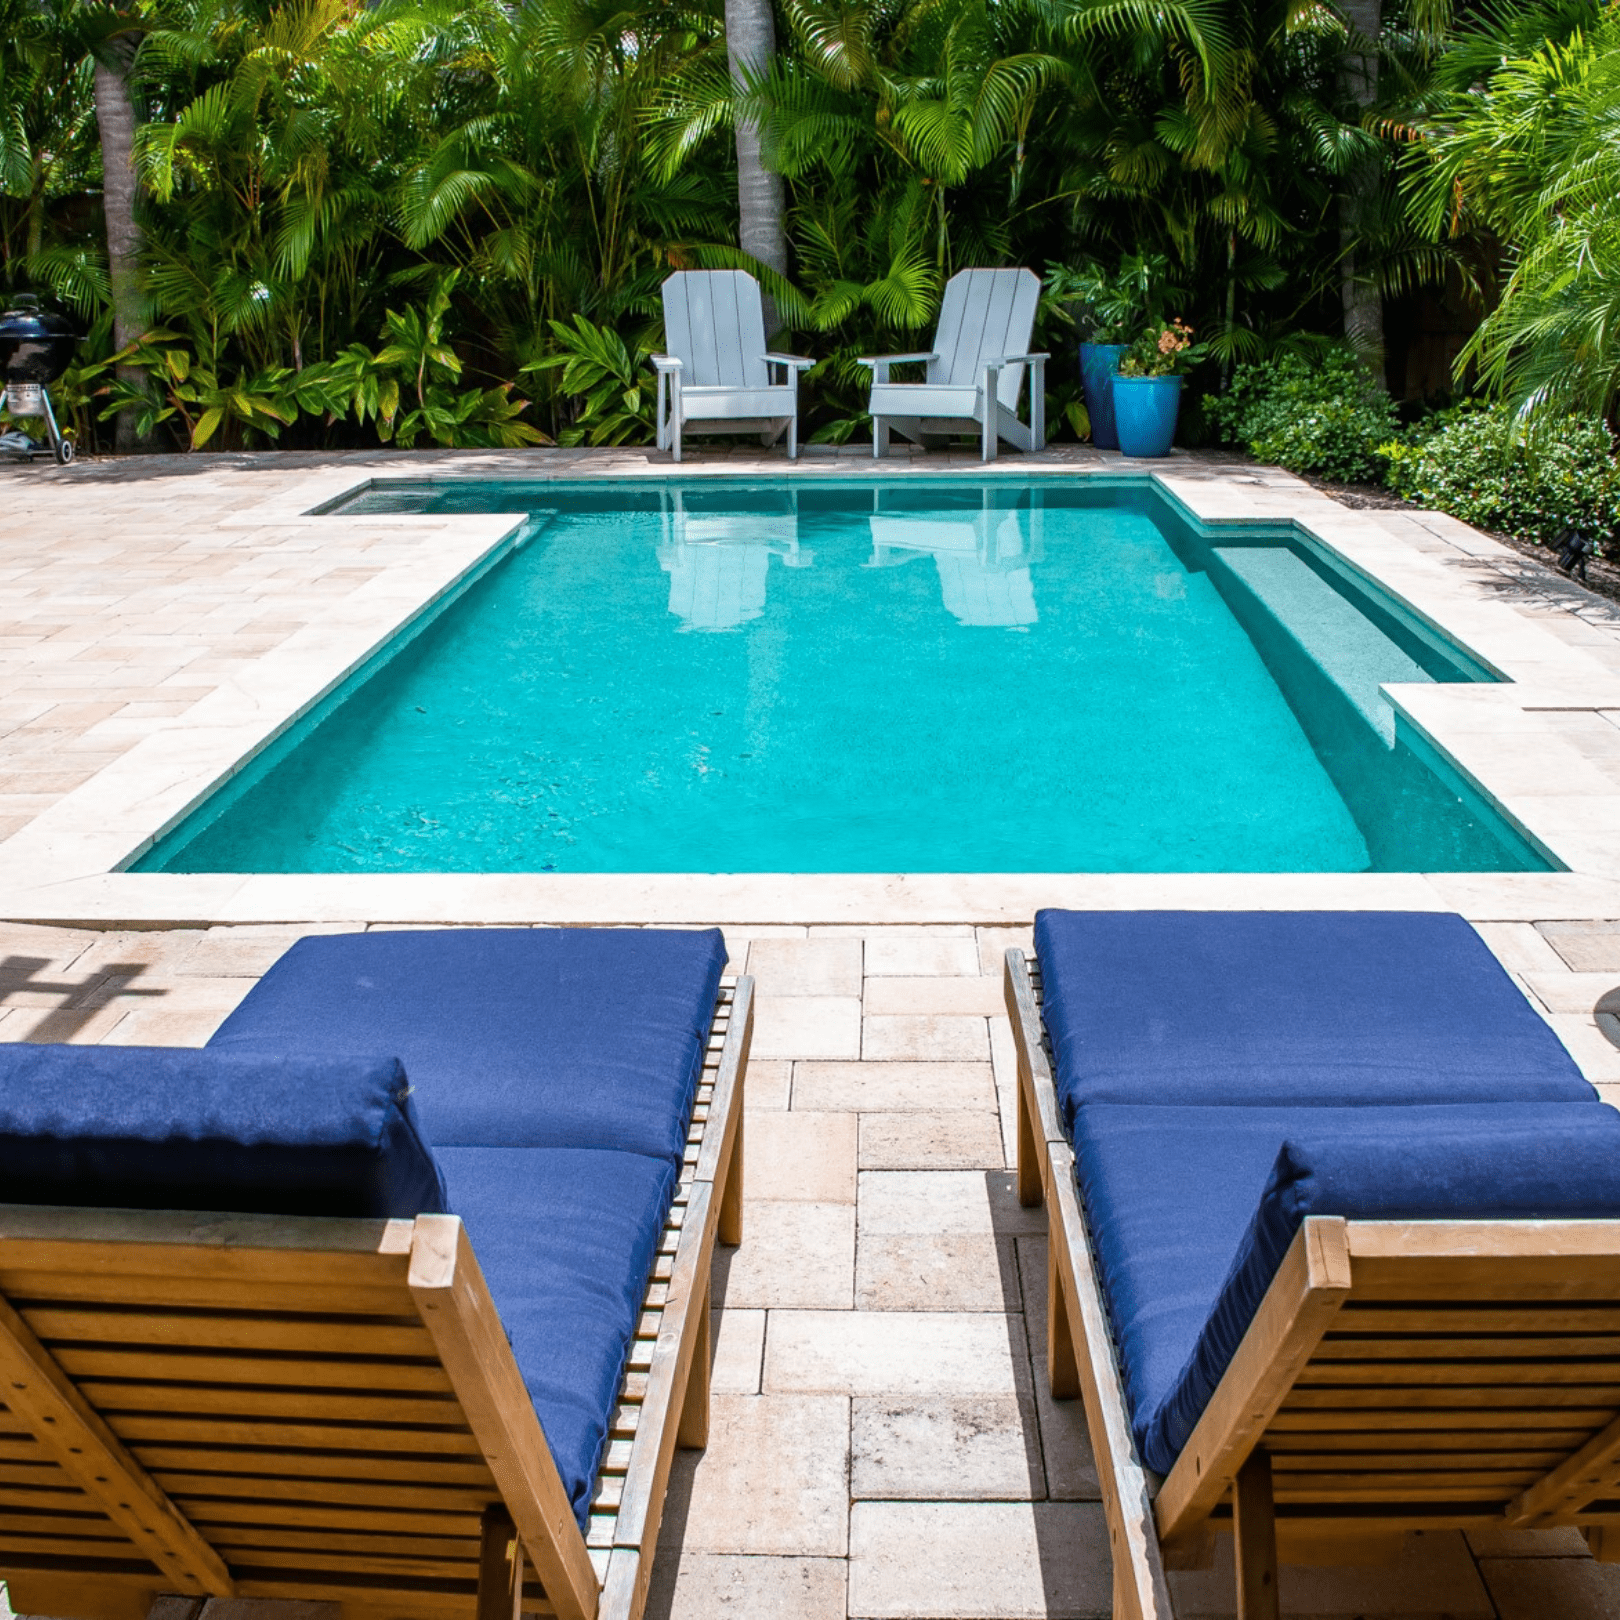 view looking at a rectangular pool from behind two wooden loungers with royal blue cushions and two gray adirondack chairs at the other end of the pool of Island Time on Anna Maria Island